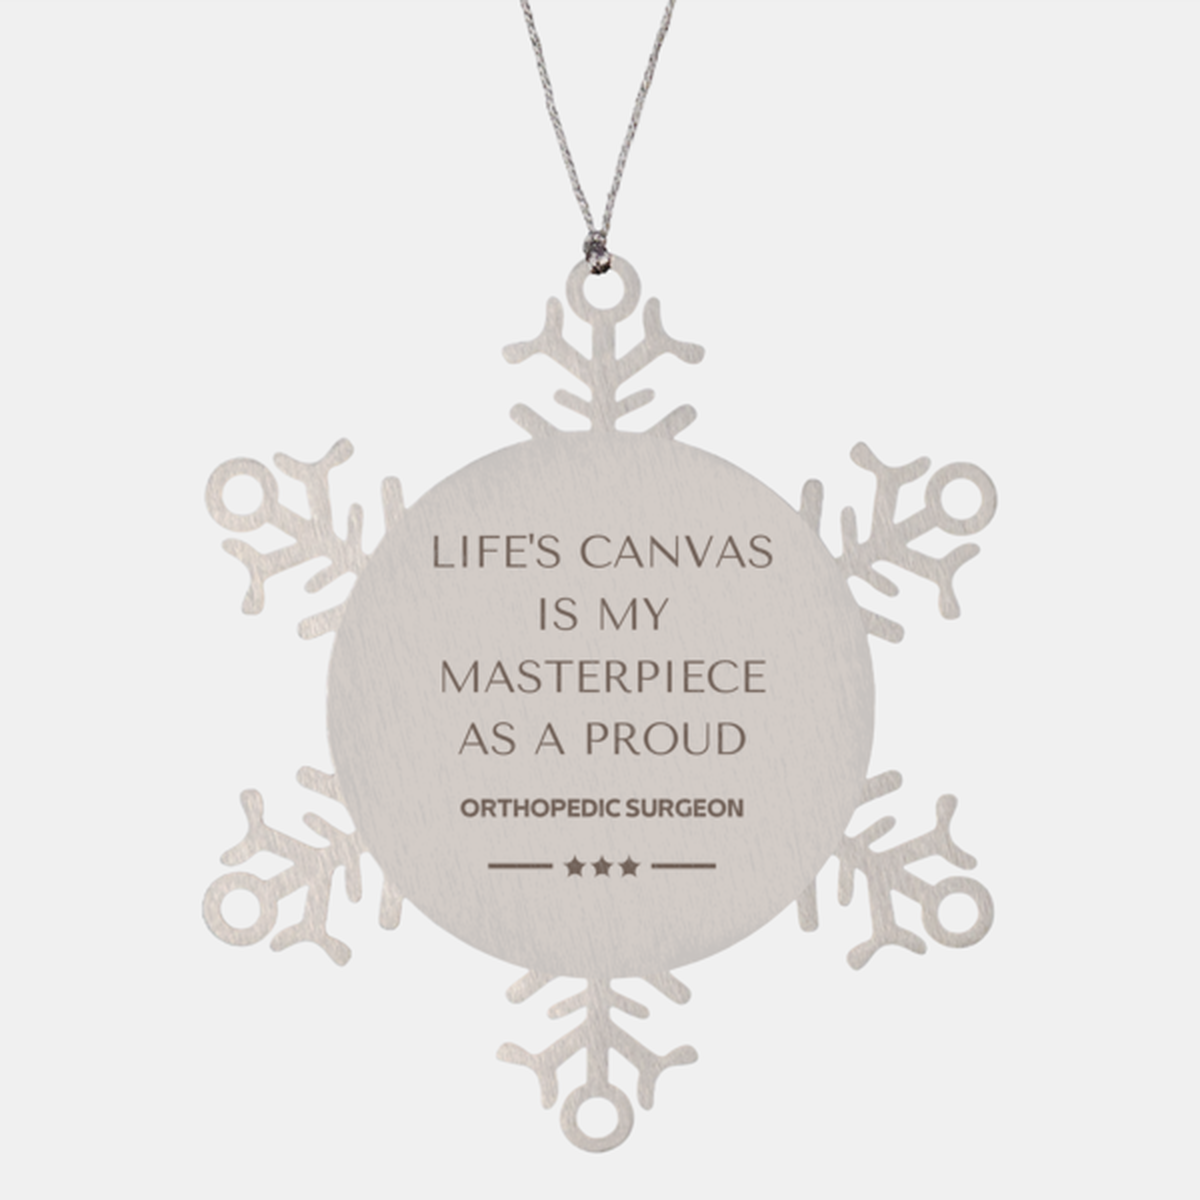 Proud Orthopedic Surgeon Gifts, Life's canvas is my masterpiece, Epic Birthday Christmas Unique Snowflake Ornament For Orthopedic Surgeon, Coworkers, Men, Women, Friends